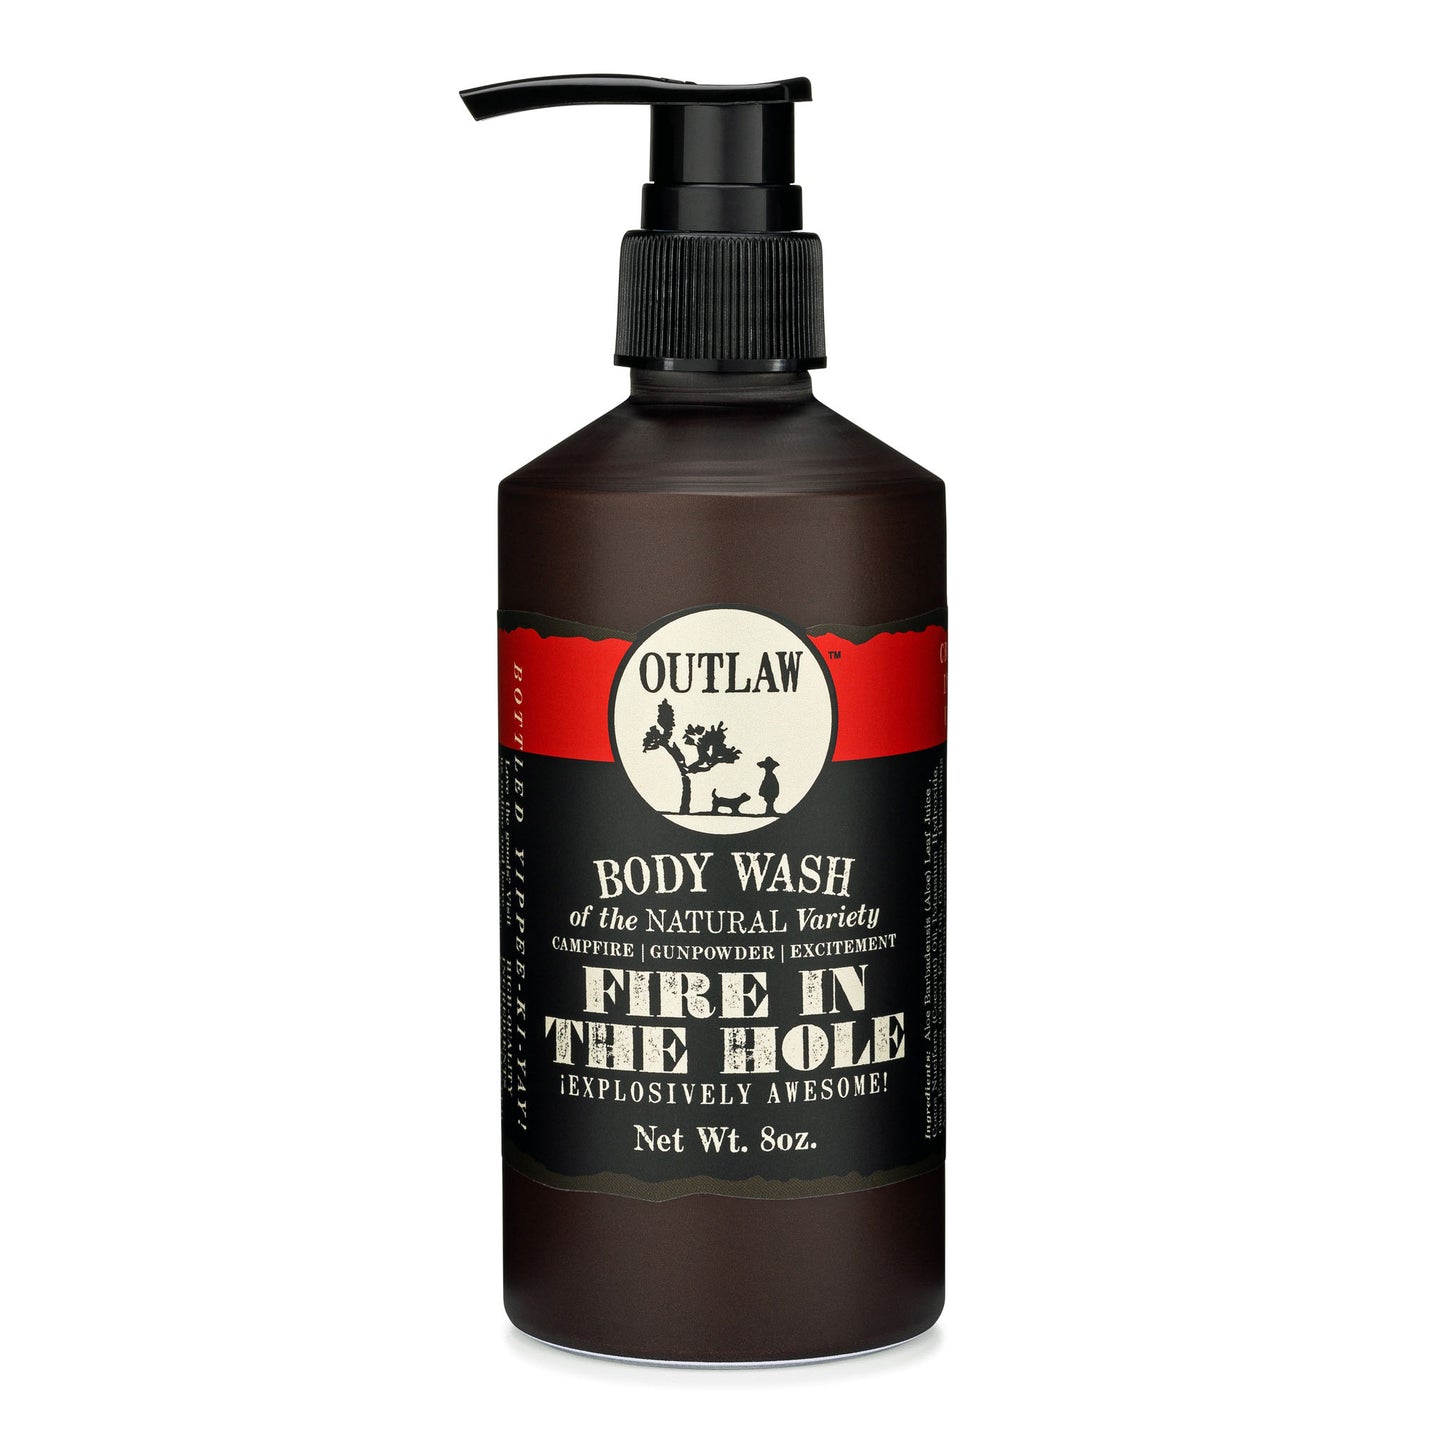 Fire in the Hole campfire natural body wash by Outlaw